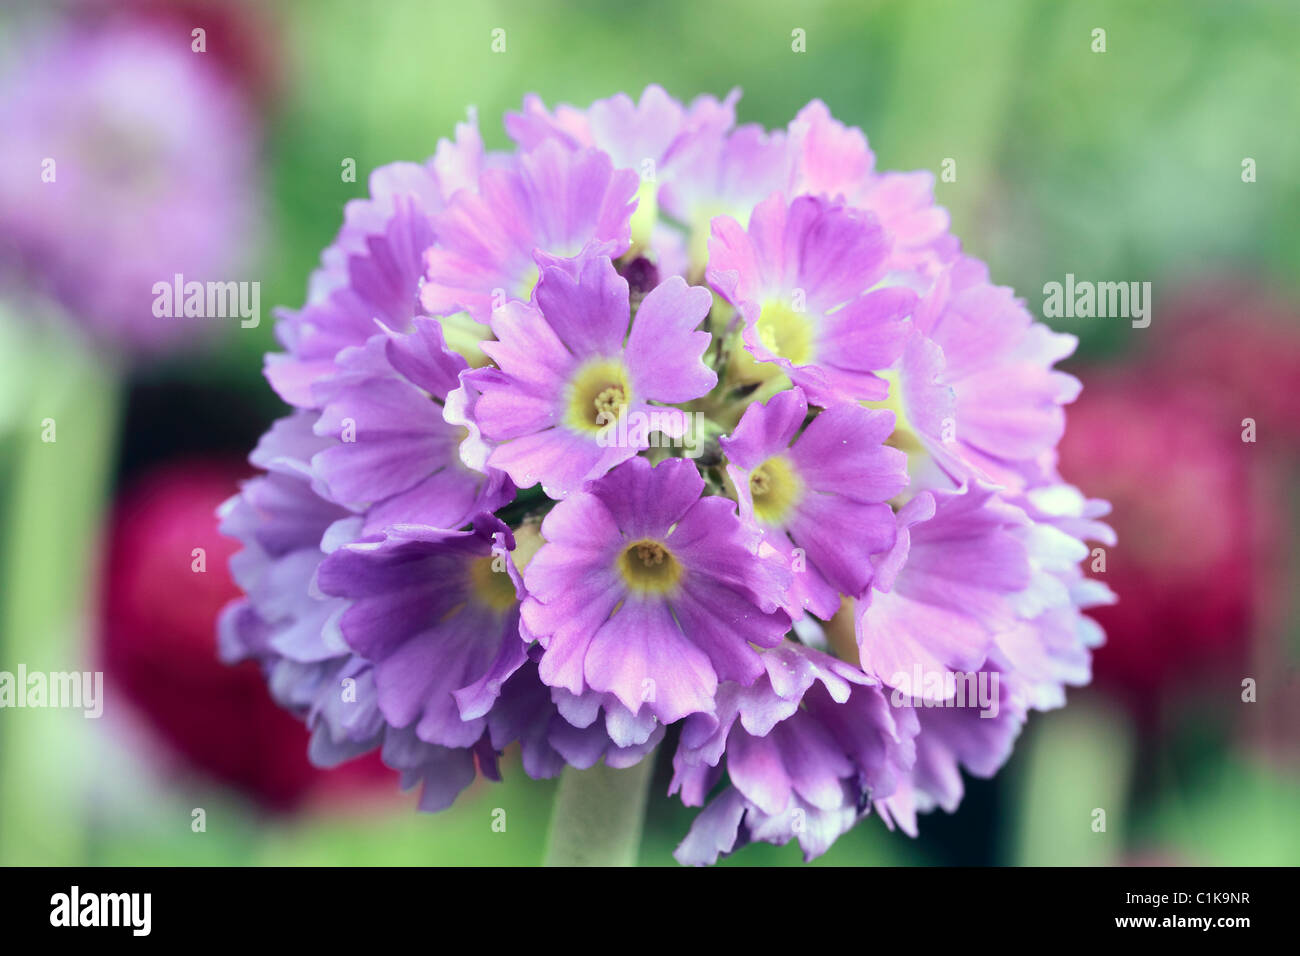 Primula denticulata, Drumstick primrose, or Himalayan Primrose, is a species of primrose native to (mainly) Afghanistan and Chinese alpine regions. Today, it is commonly cultivated in domestic gardens Stock Photo